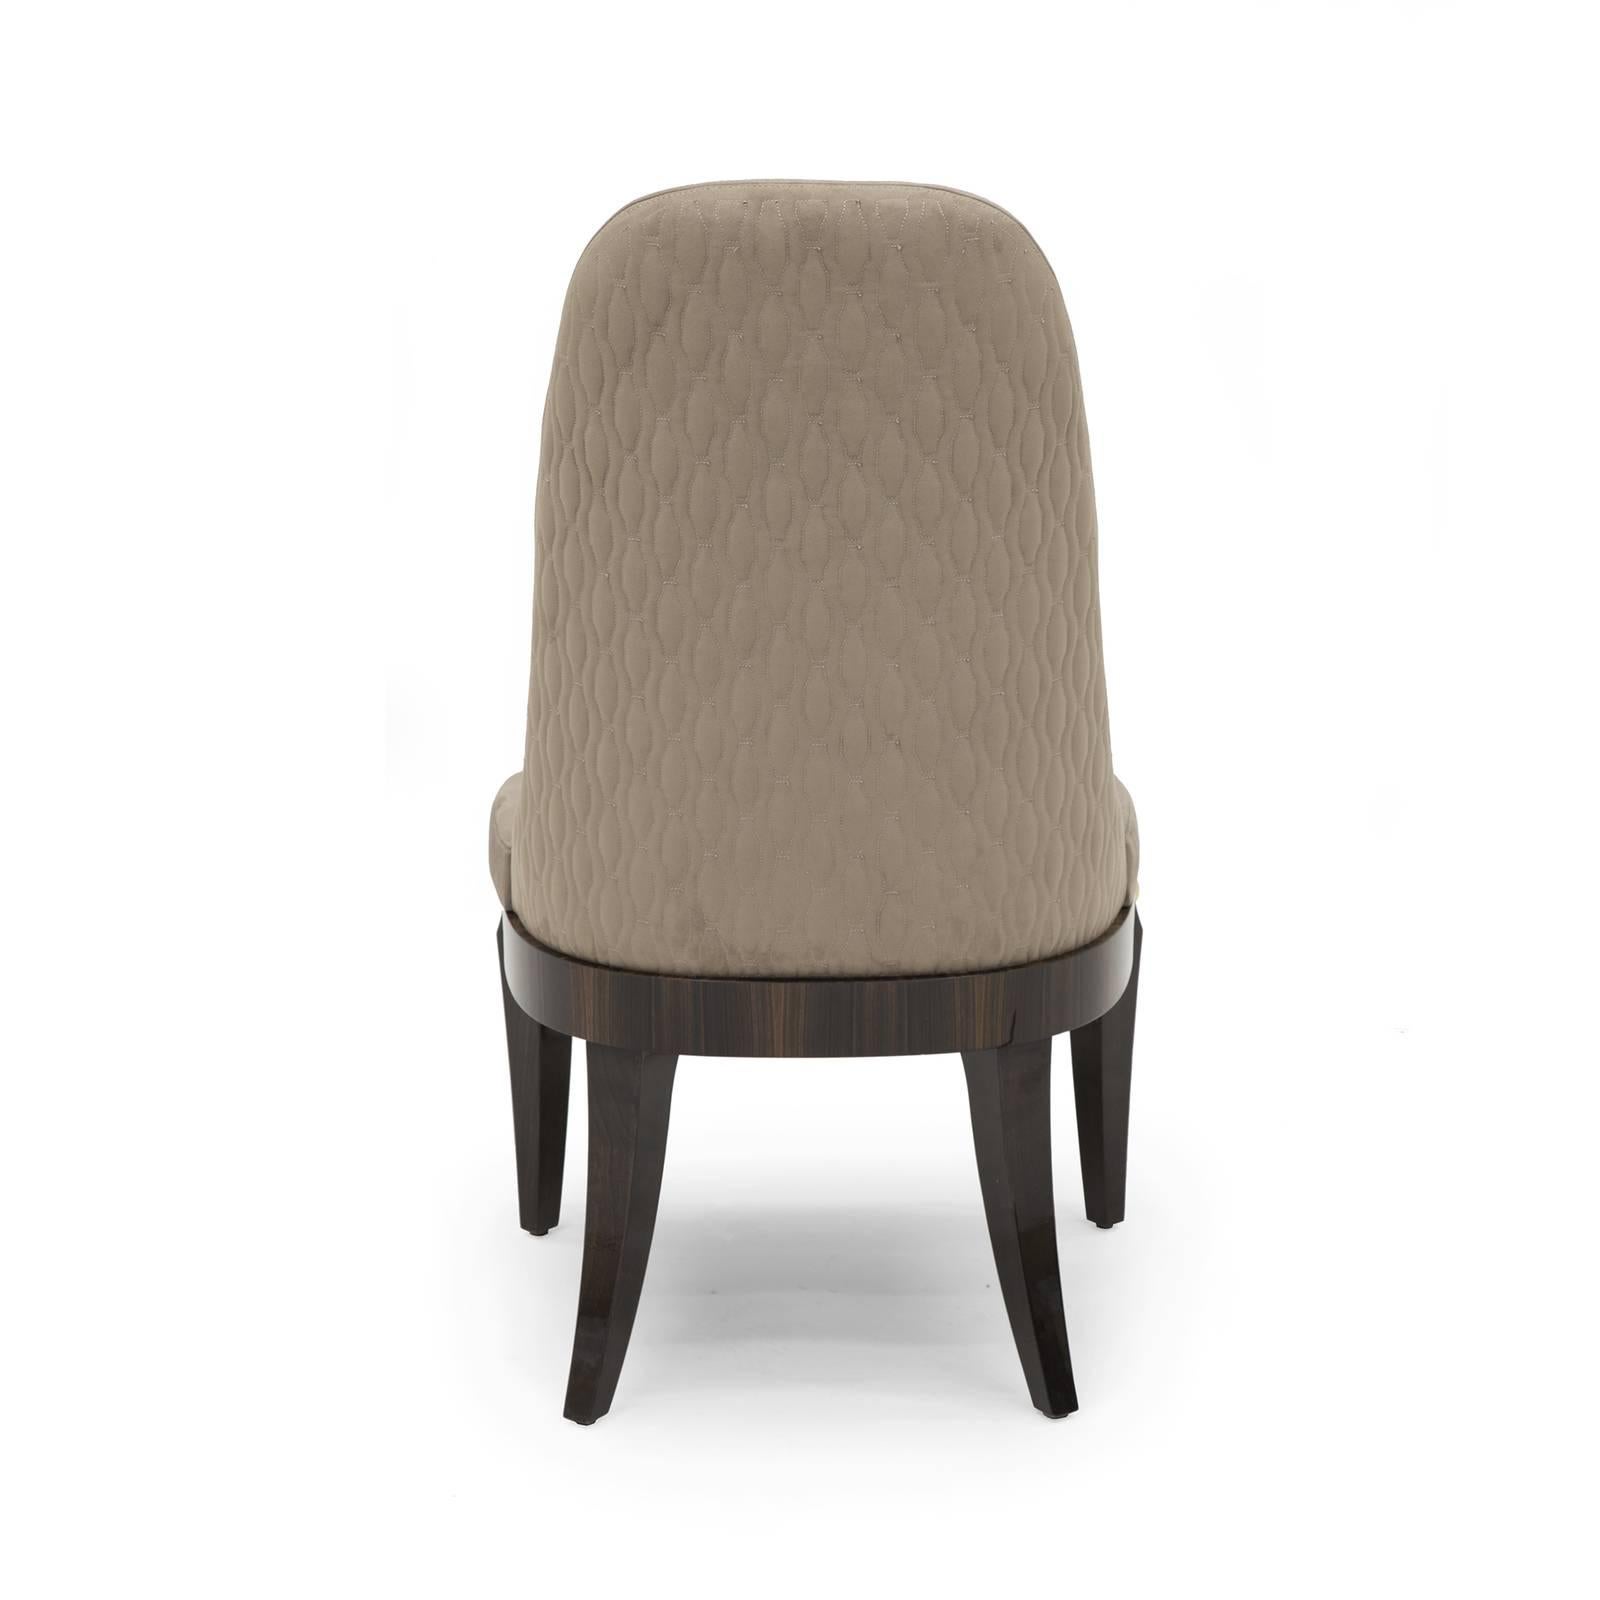 Distinguished for its effortless silhouette, this chair will be a sublime accent around any dining room table. The seat is crafted of veneered ebony and has a round shape with squared front embellished with vertical inlays of gold-plated metal. The